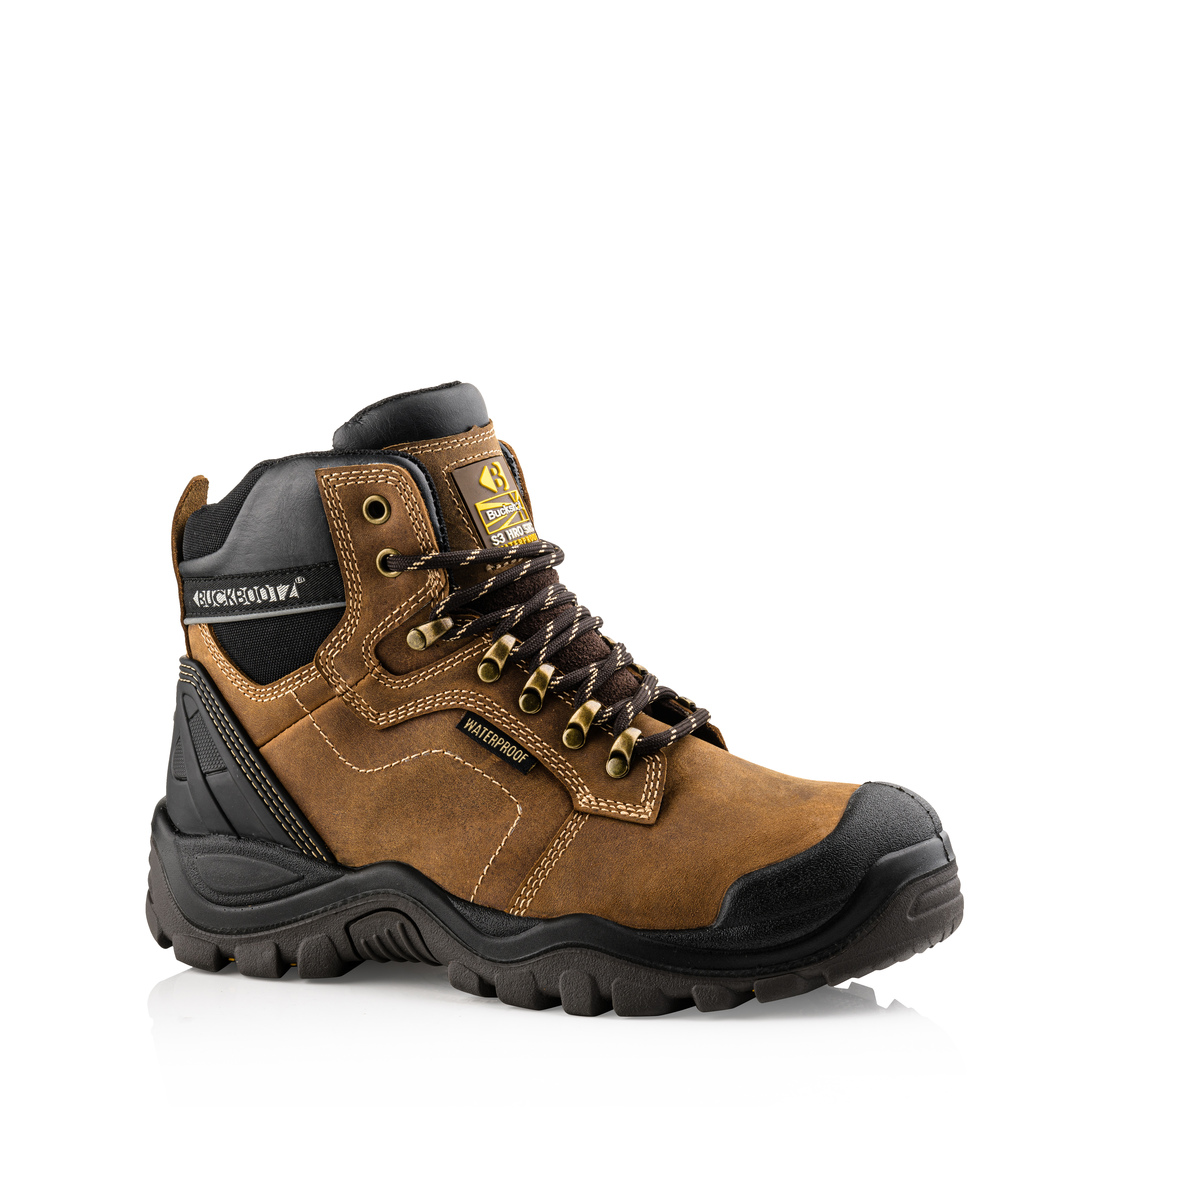 Buckler Steel Toe & Midsole Safety Lace up Work Boots 